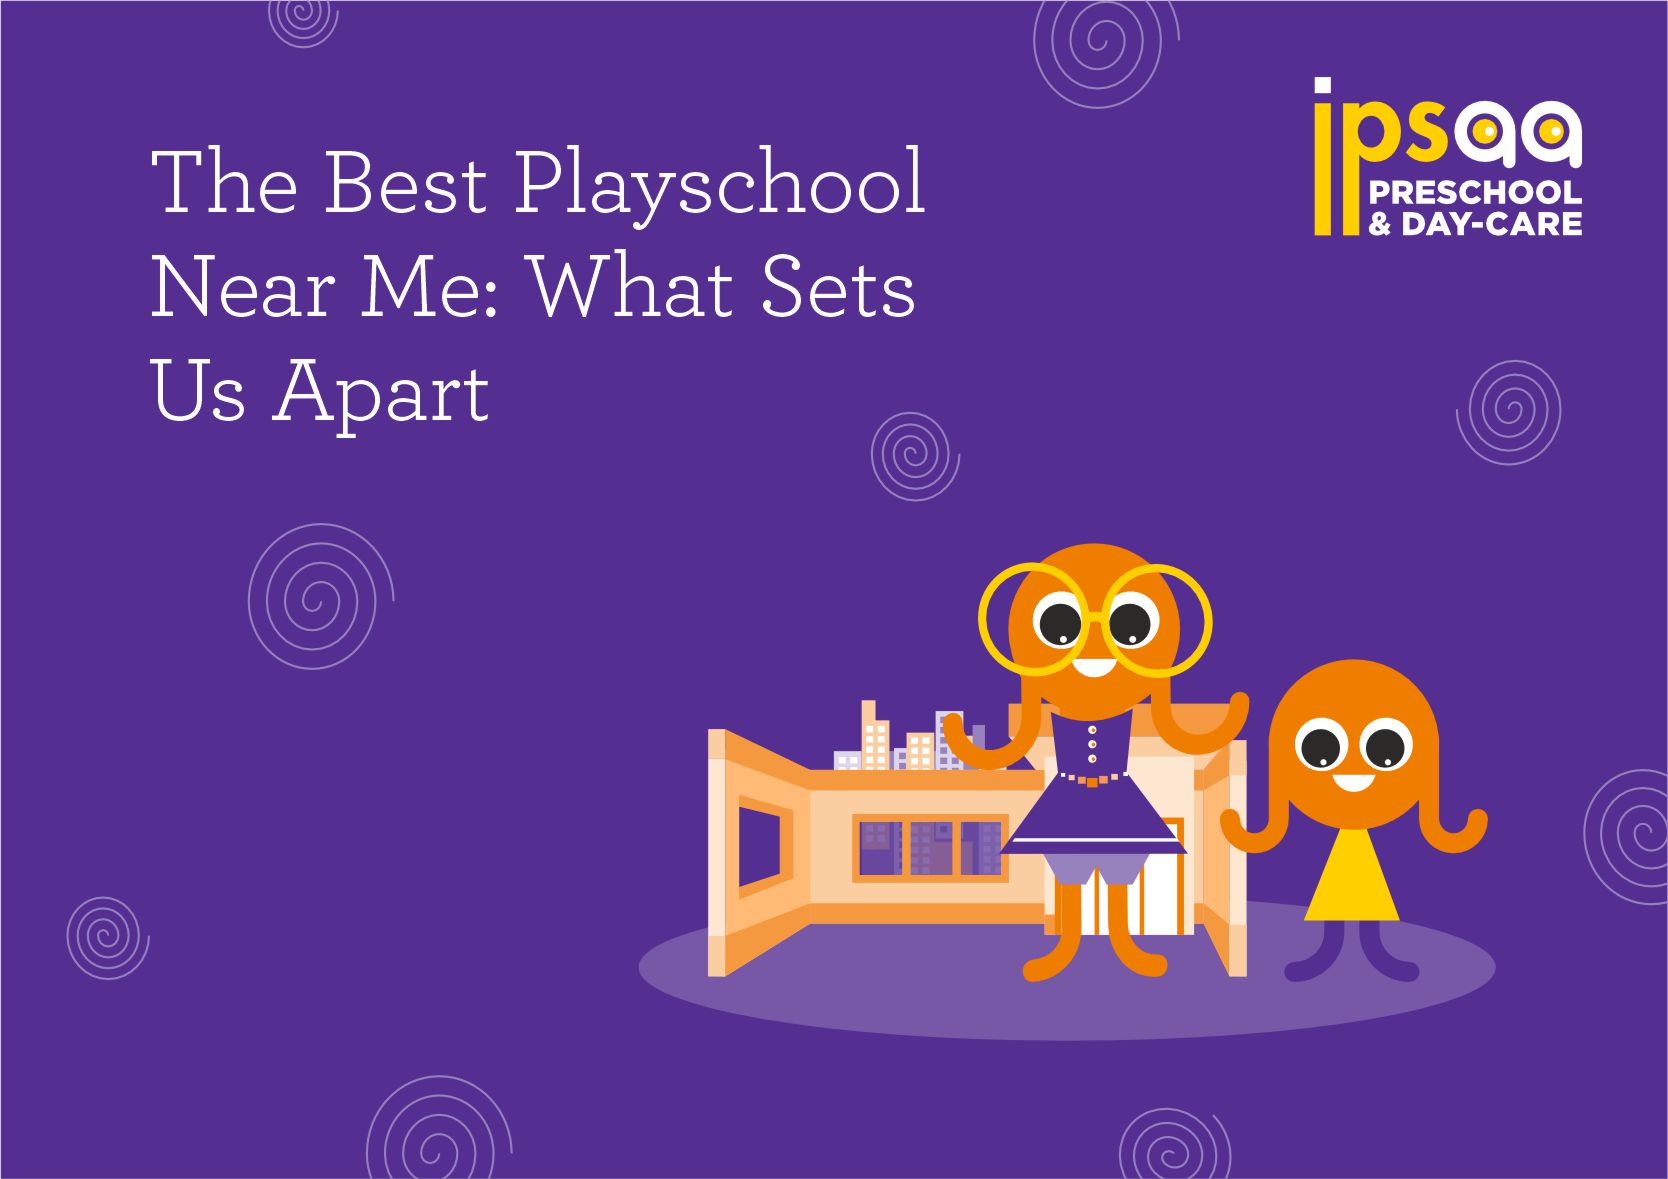 The Best Playschool Near Me: What Sets Us Apart